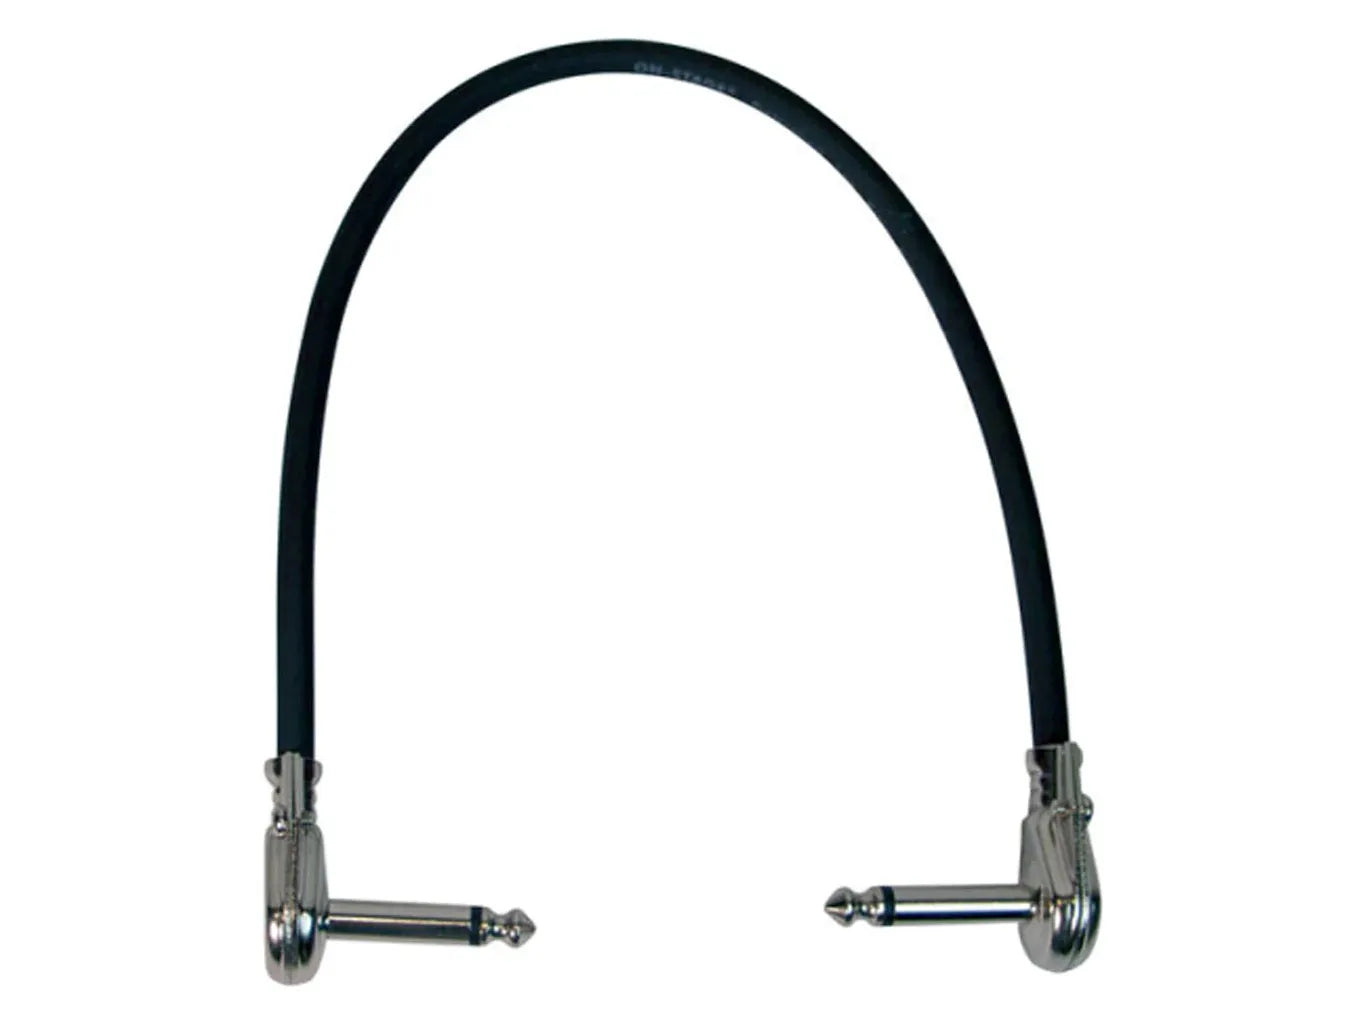 On-Stage 1' Patch Cable